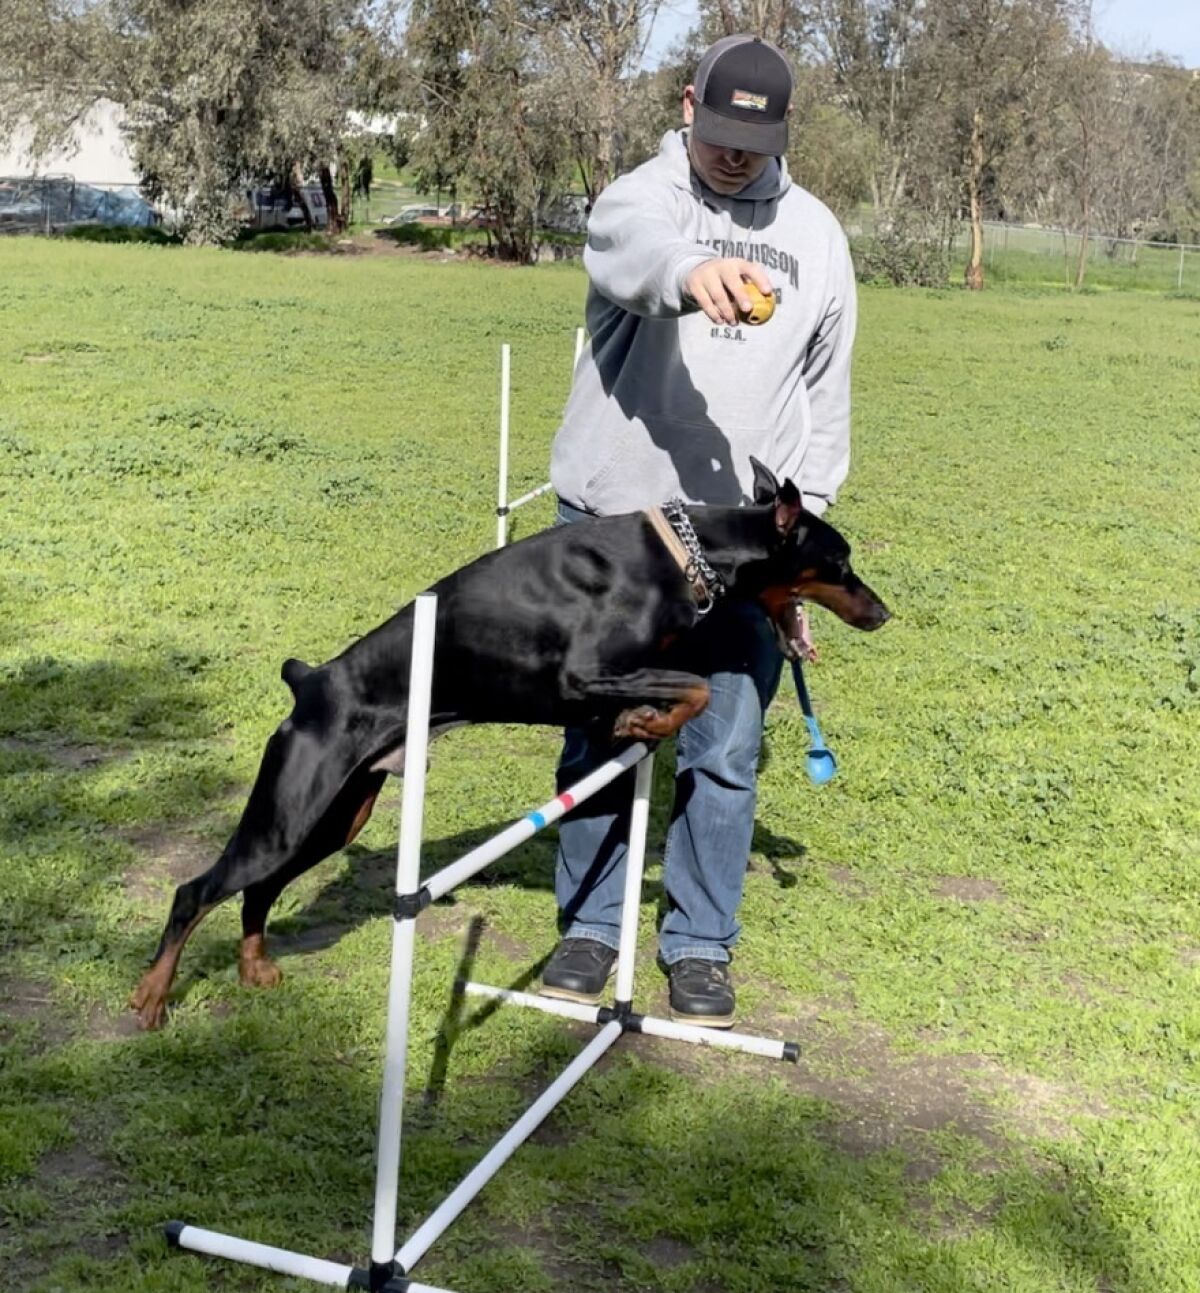 Danny Marinshaw helps his dog get exercise at the 3-acre dog park in Ramona.